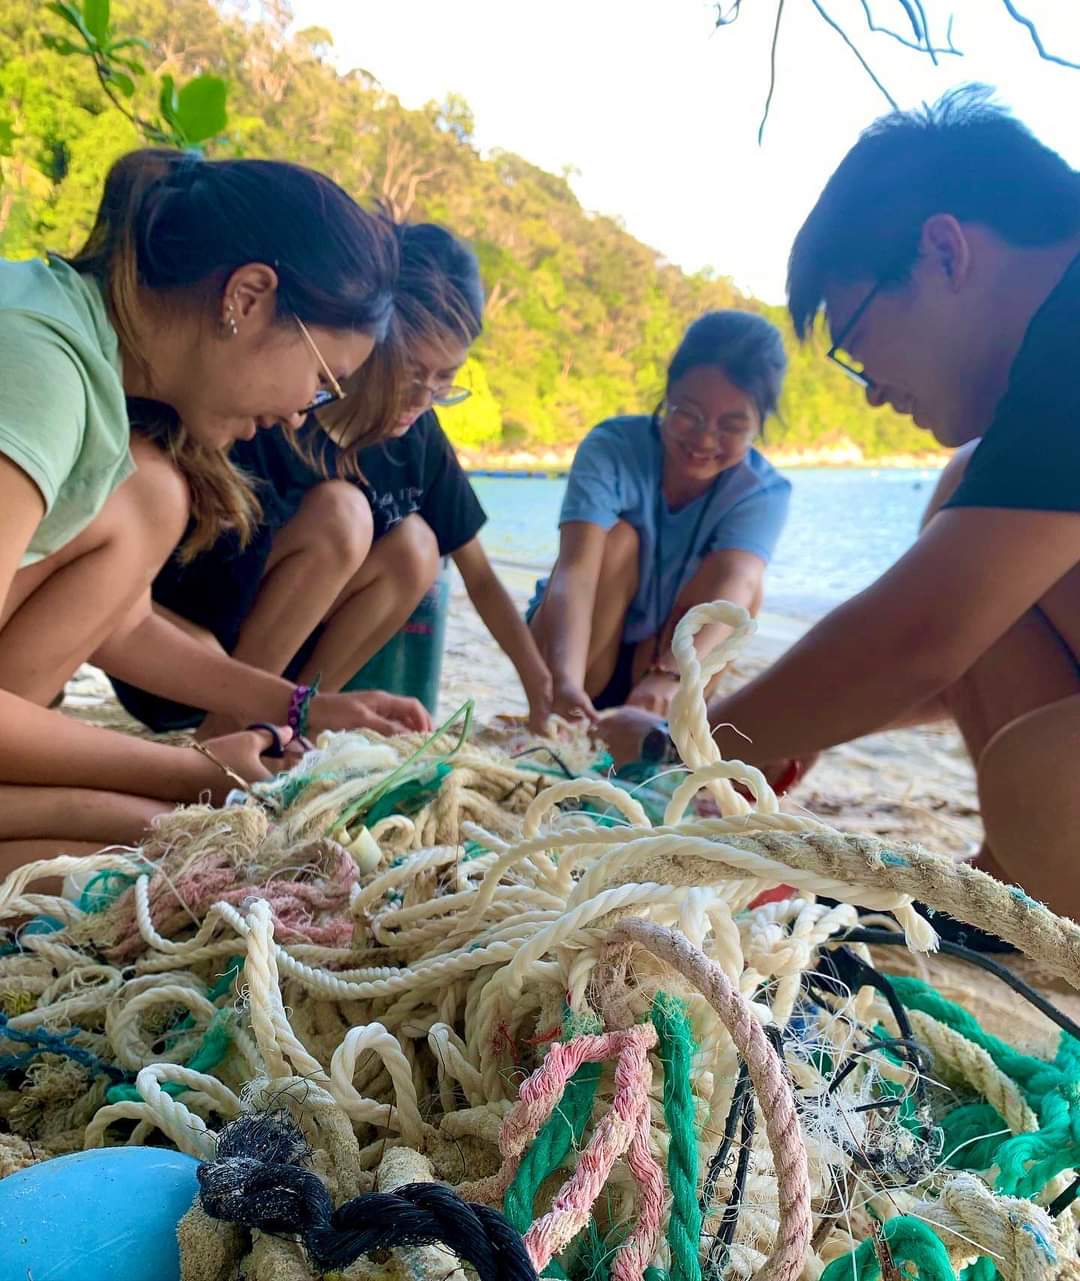 A group of people cut up a tangle of ropes and fishing nets